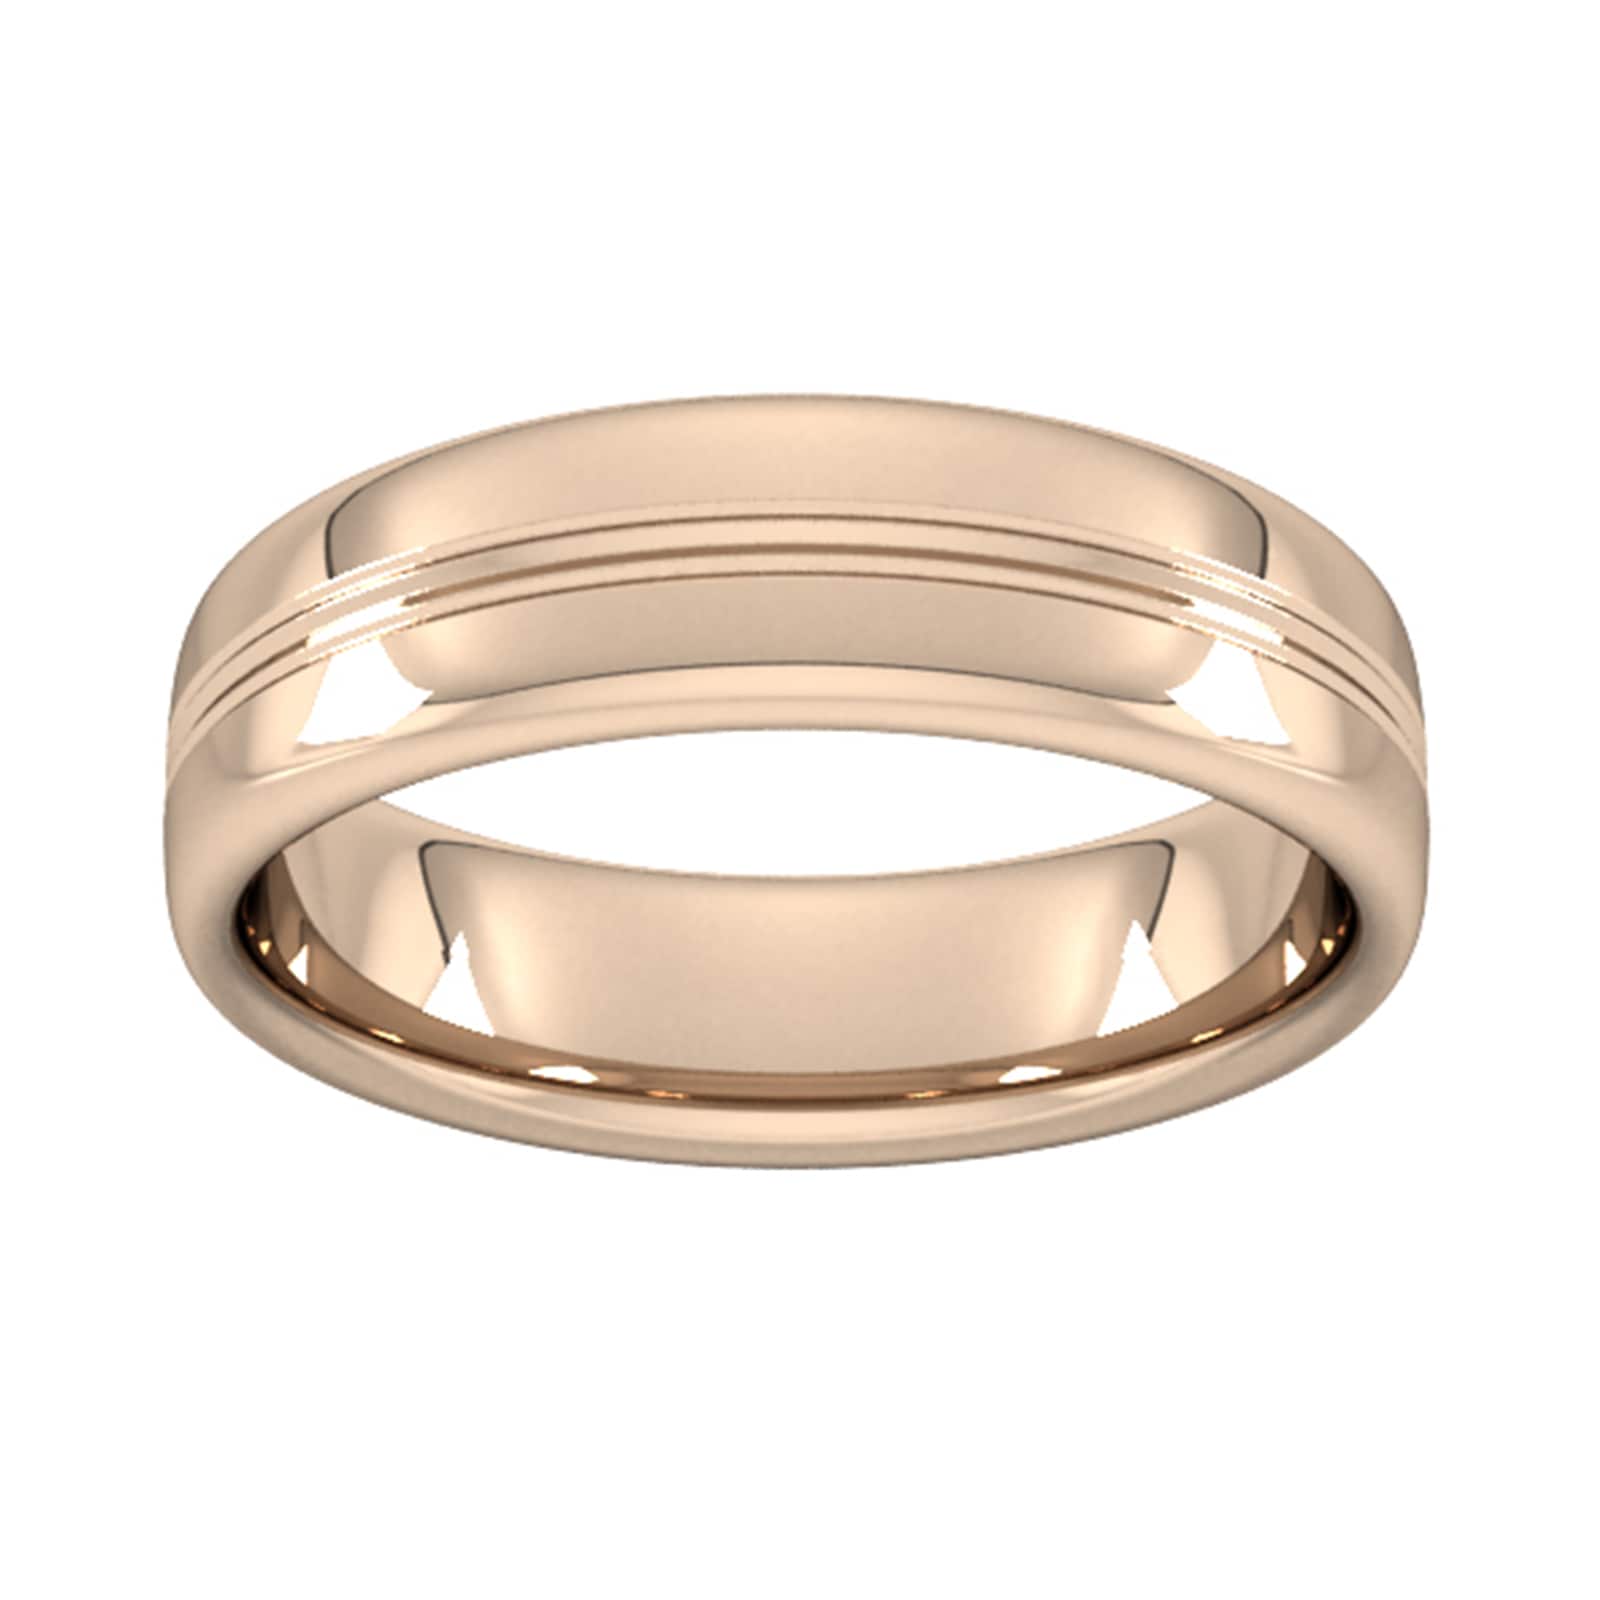 6mm Slight Court Standard Grooved Polished Finish Wedding Ring In 9 Carat Rose Gold - Ring Size W